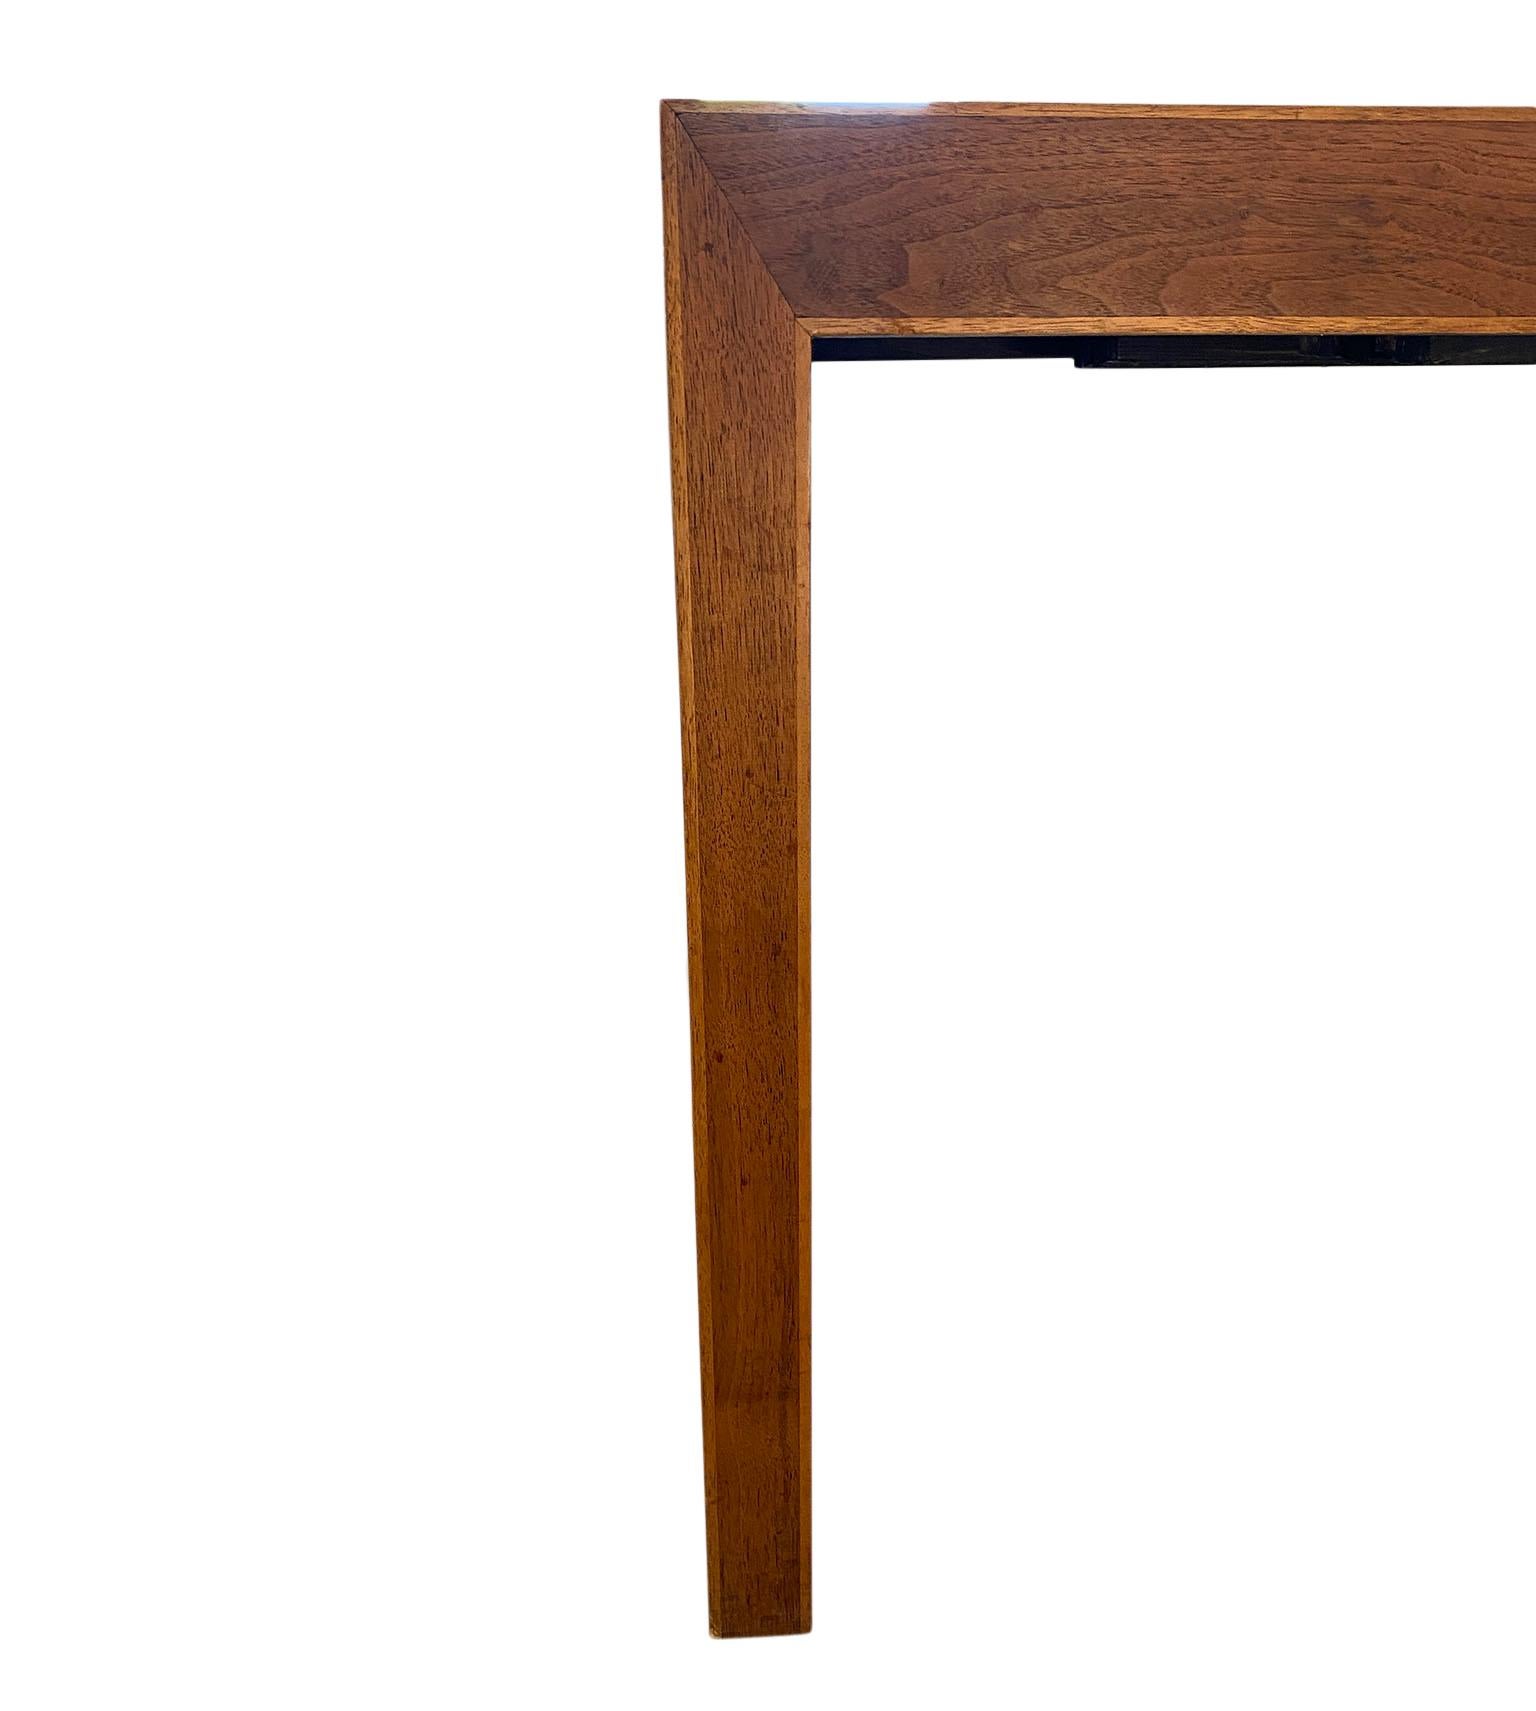 Mid-20th Century Midcentury Milo Baughman Walnut Expandable Parsons Dining Table with '2' Leaves